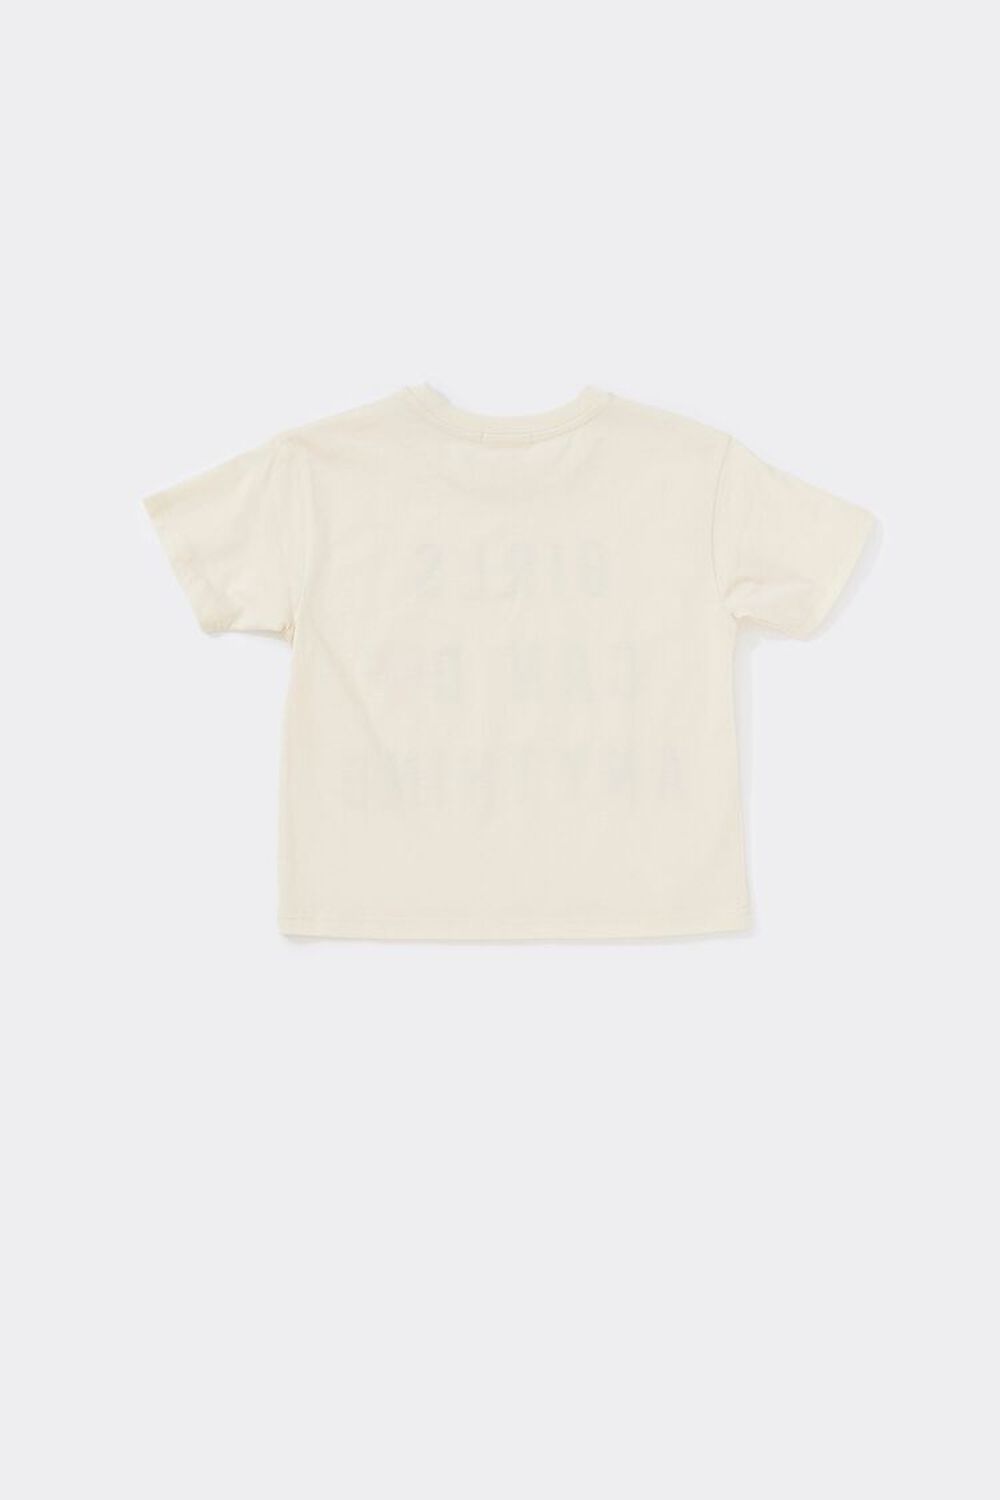 Girls Girls Can Do Anything Graphic Tee (Kids)